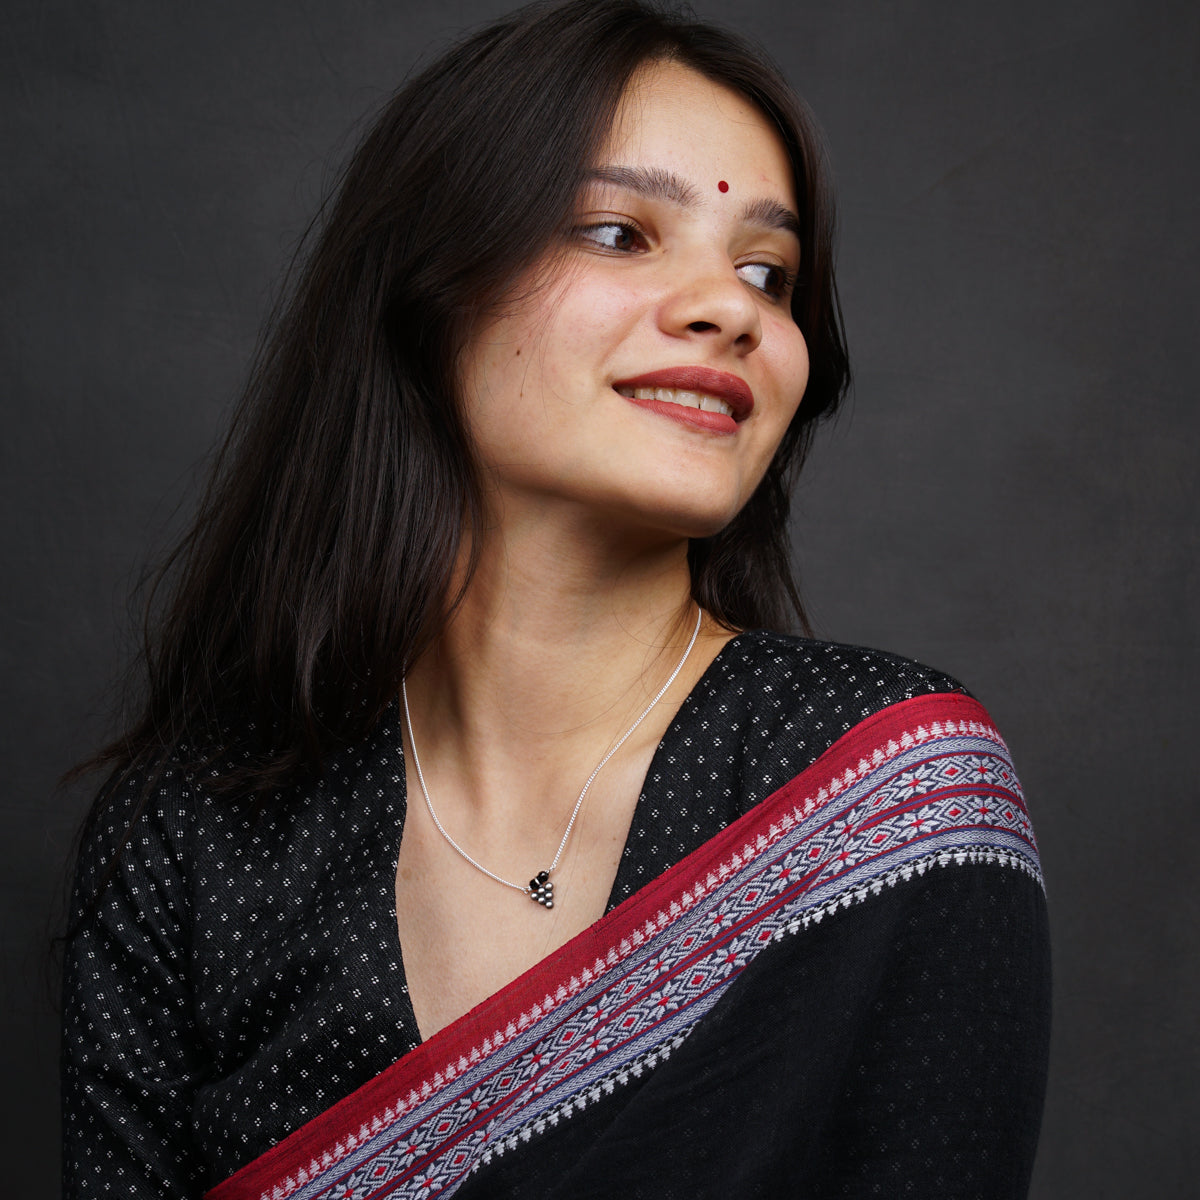 a woman wearing a black and red sari